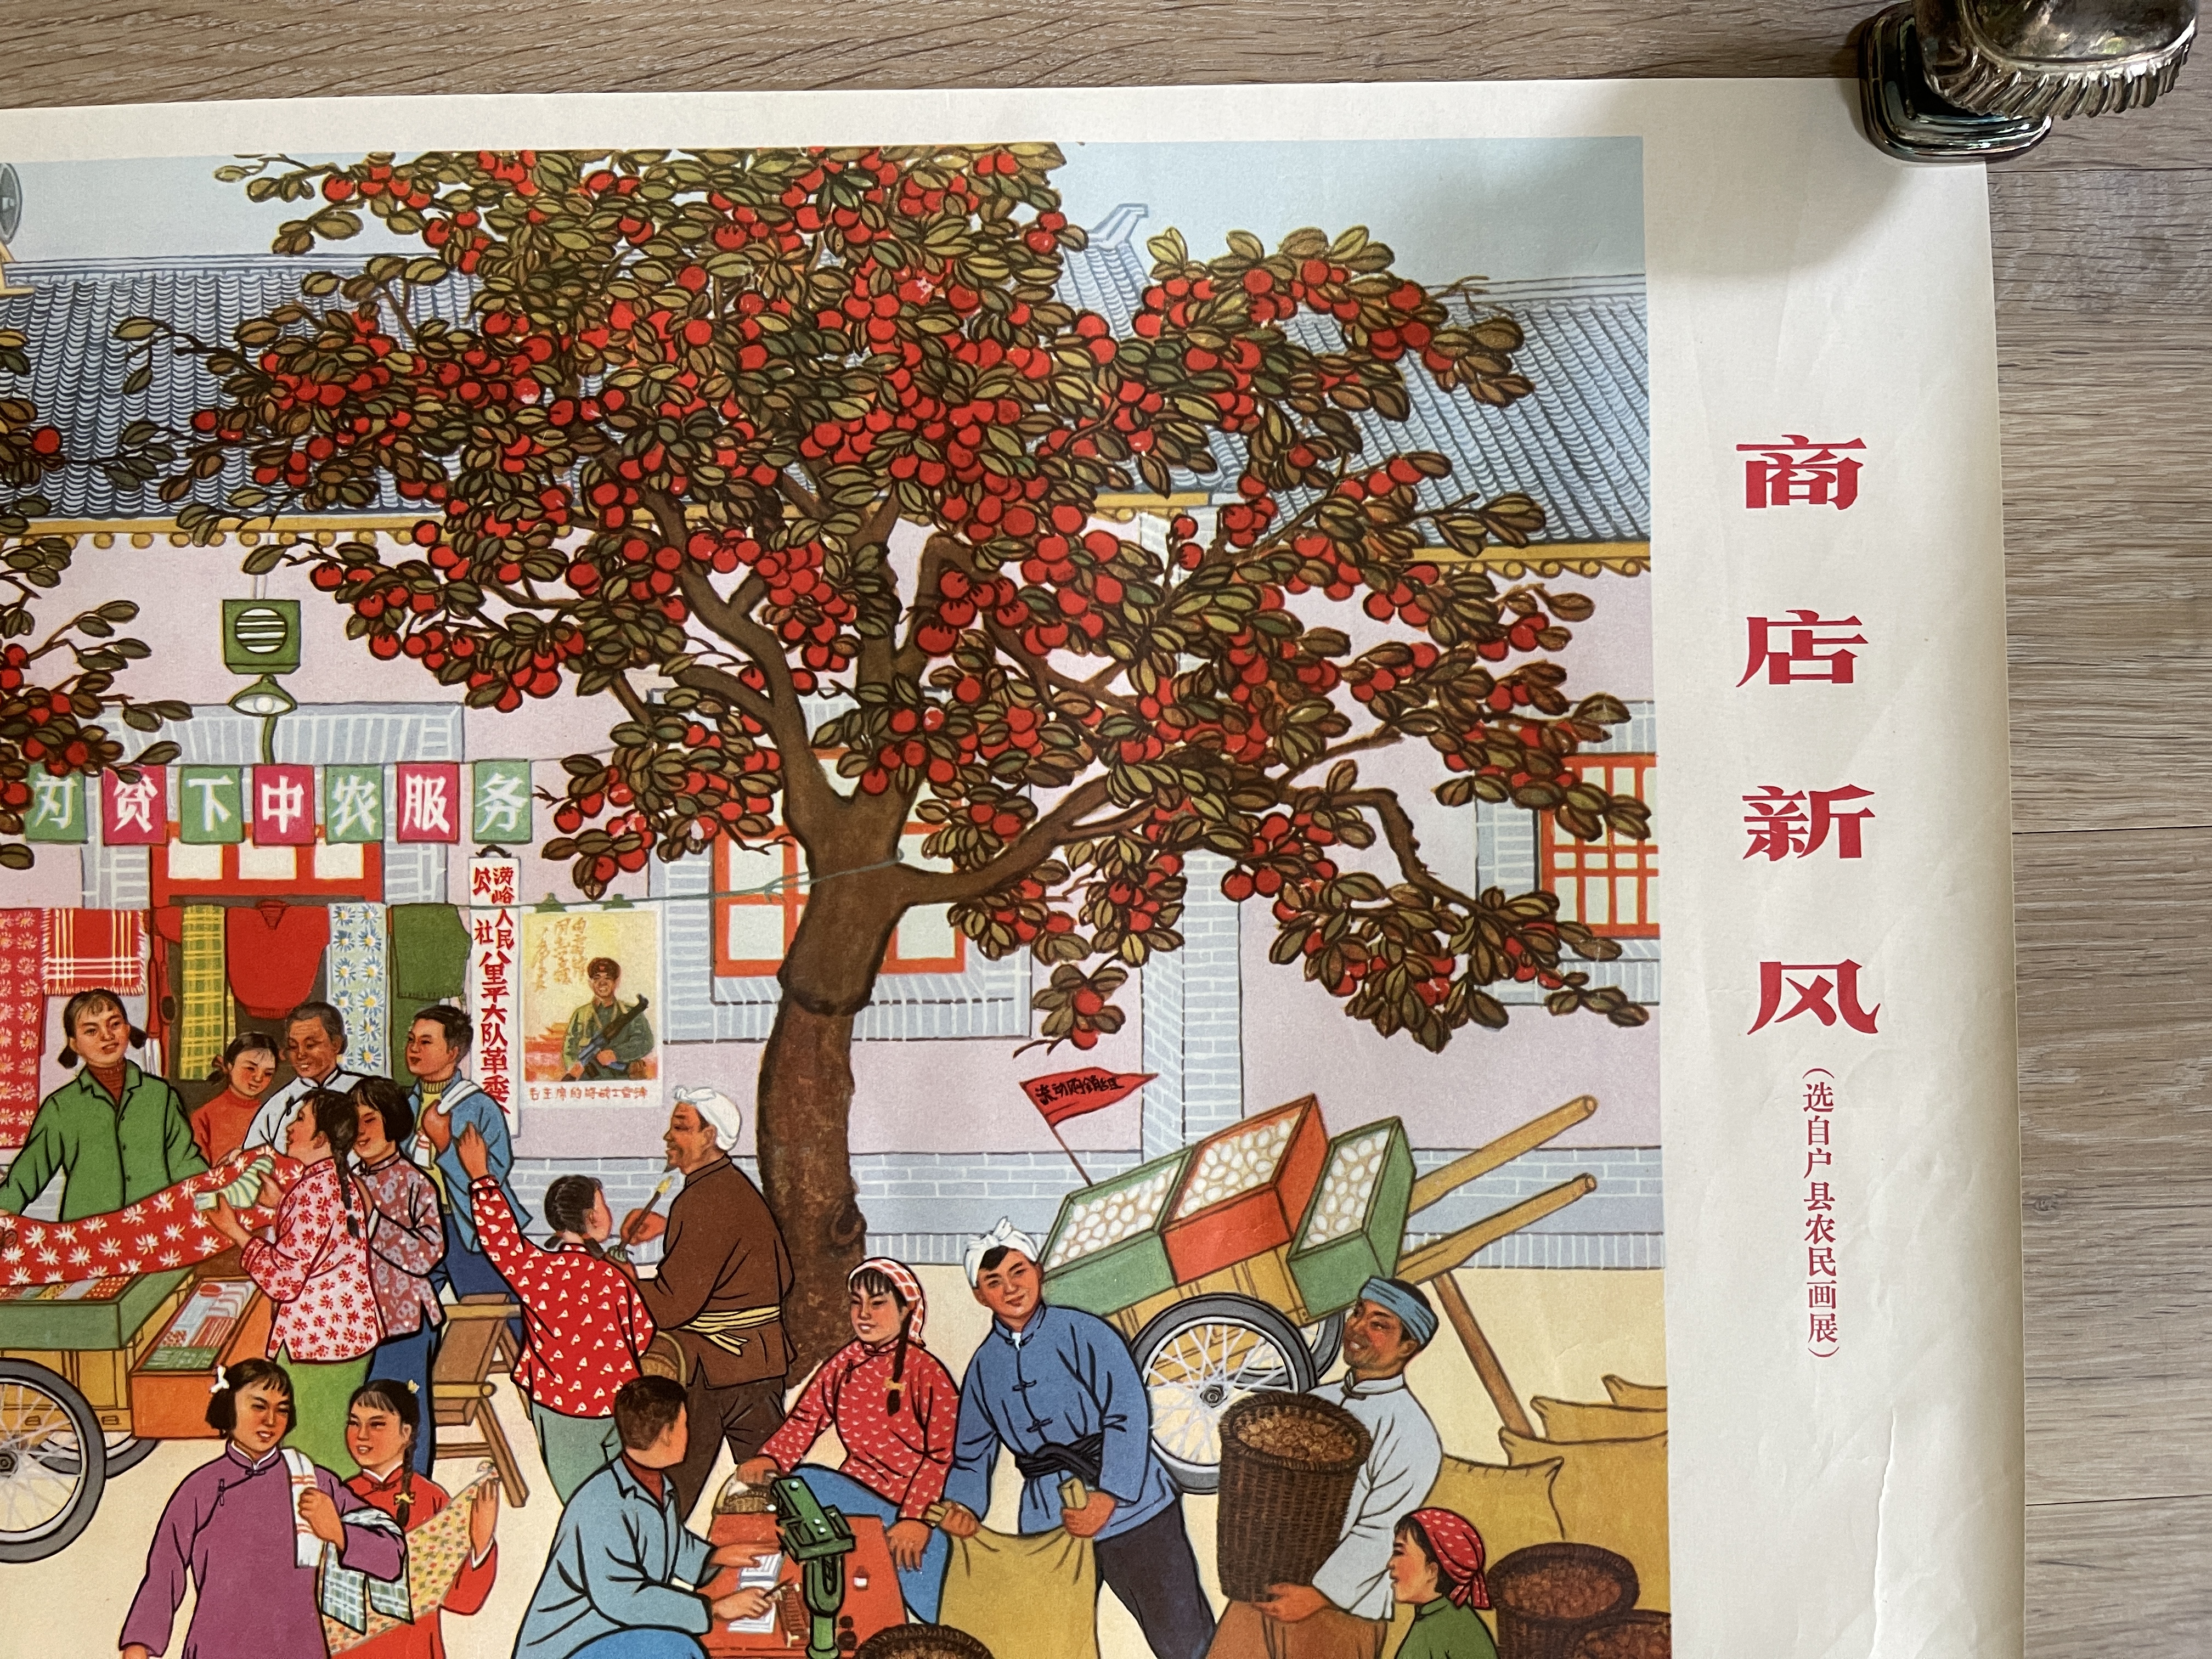 New Market Style - Original Vintage Chinese Poster - Image 3 of 7